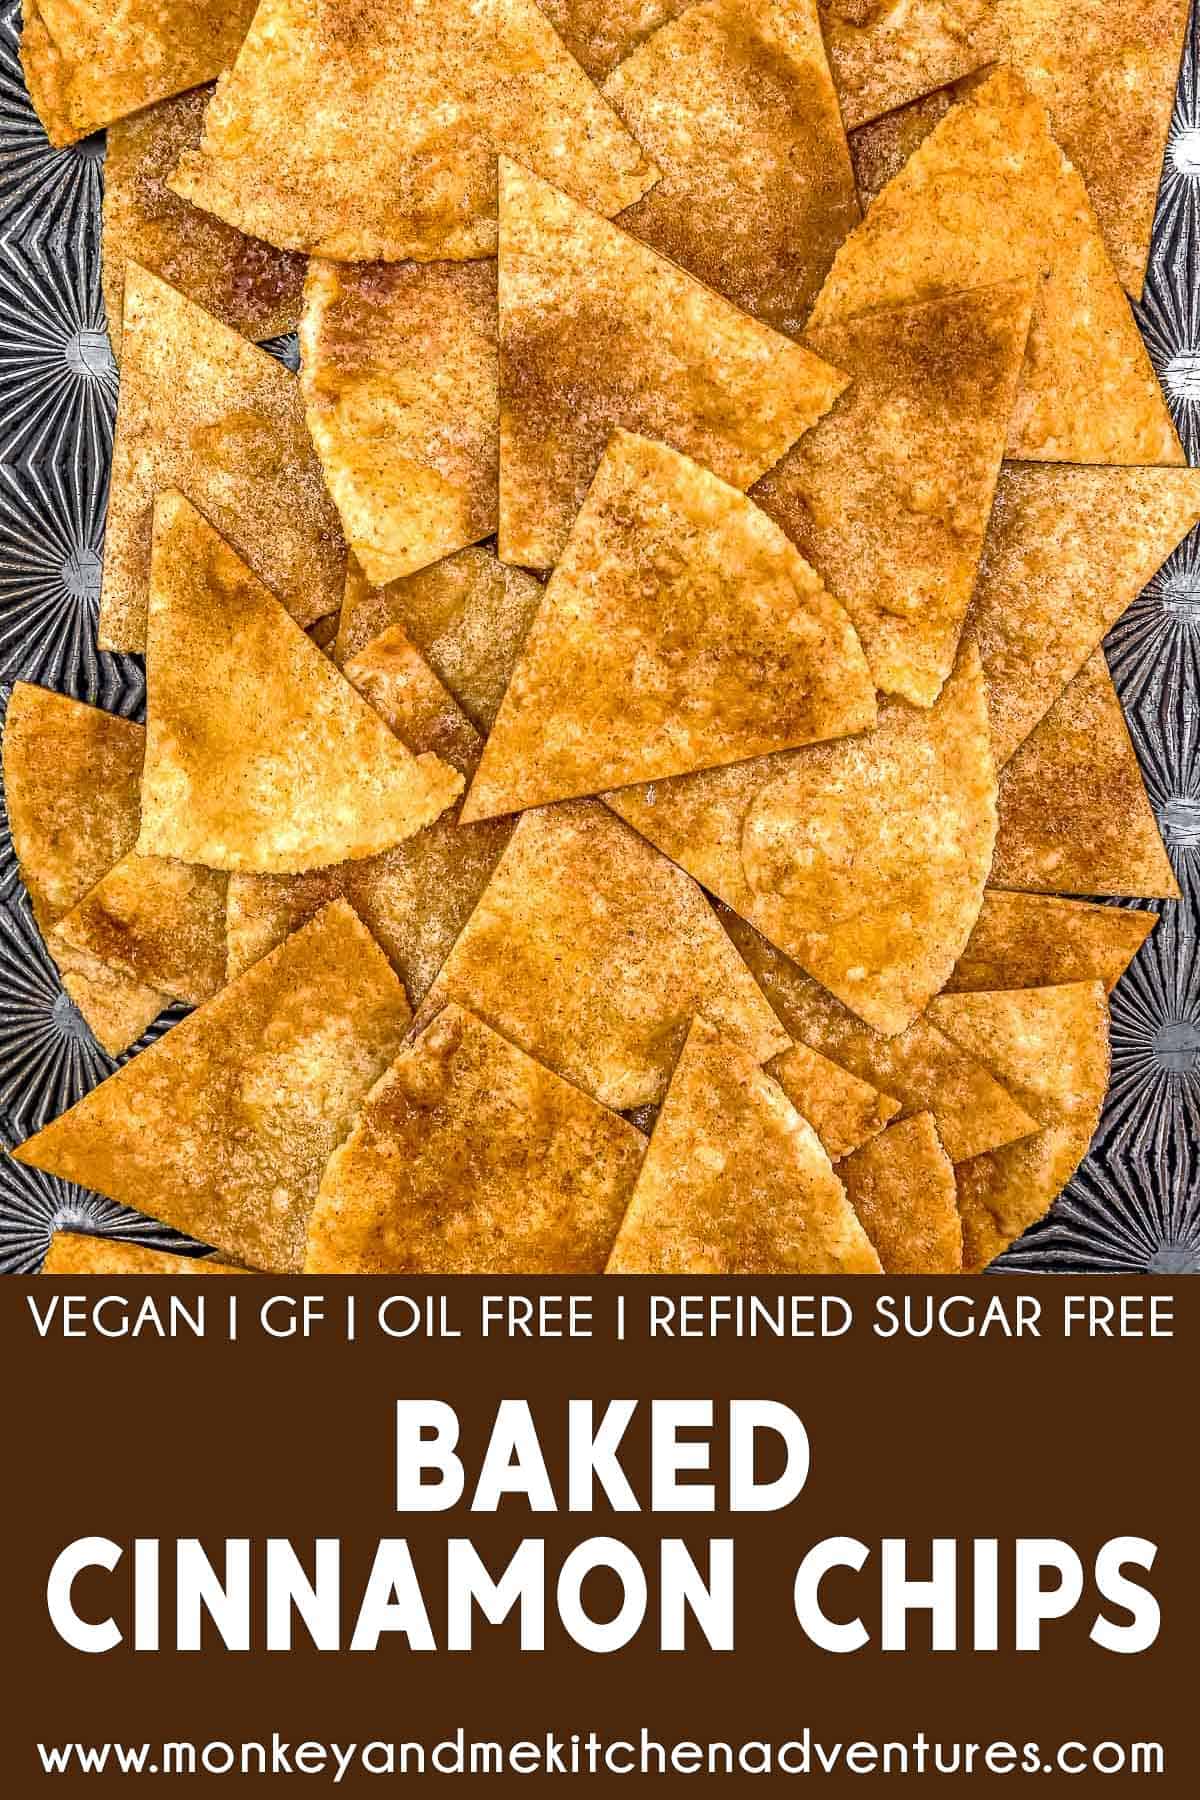 Baked Cinnamon Chips with text description